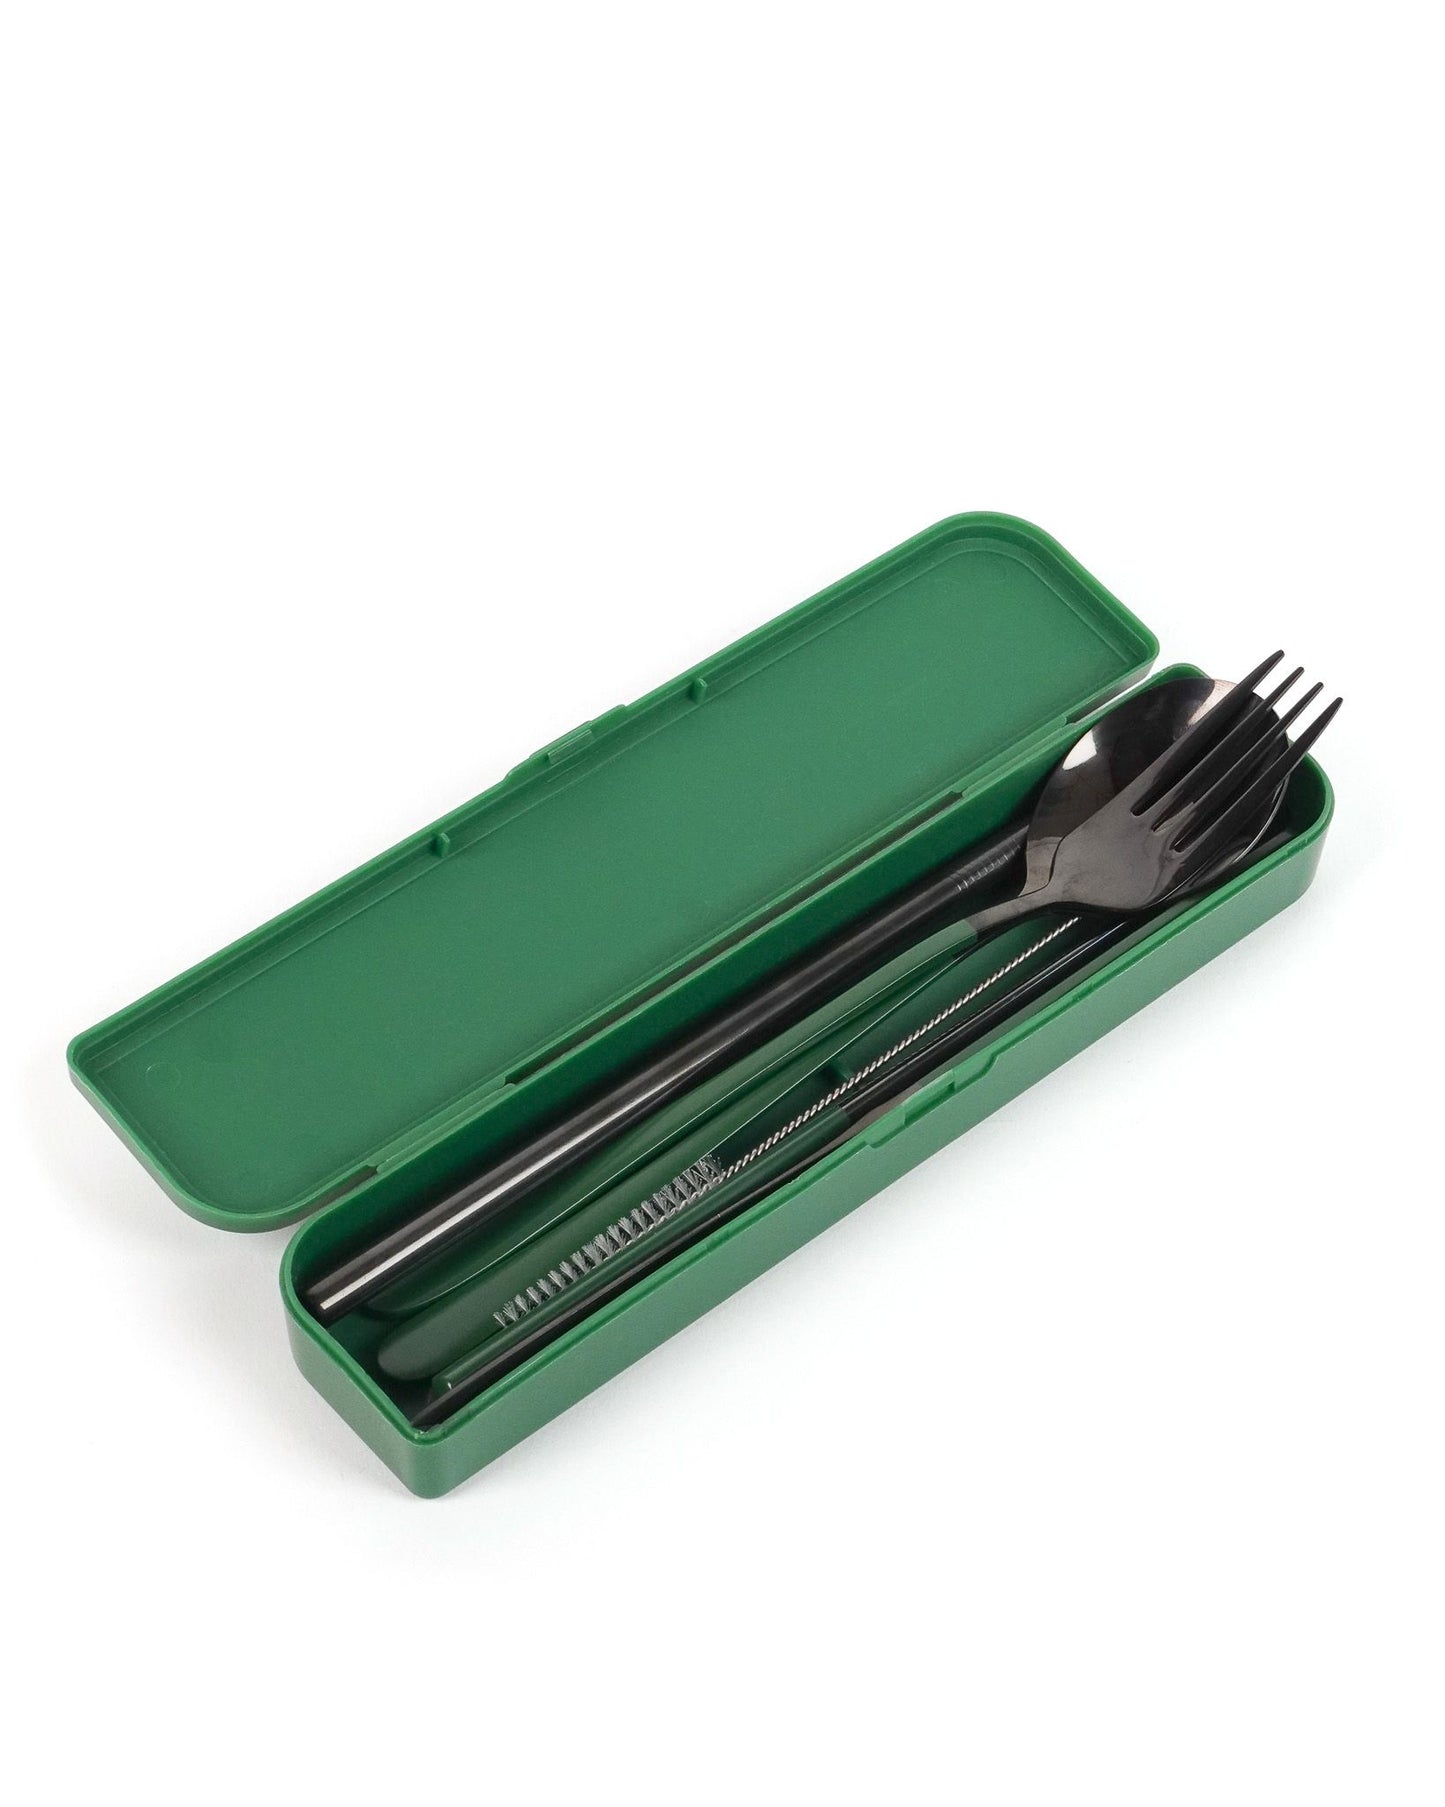 Cutlery Kit | Black with Forest Green Handles